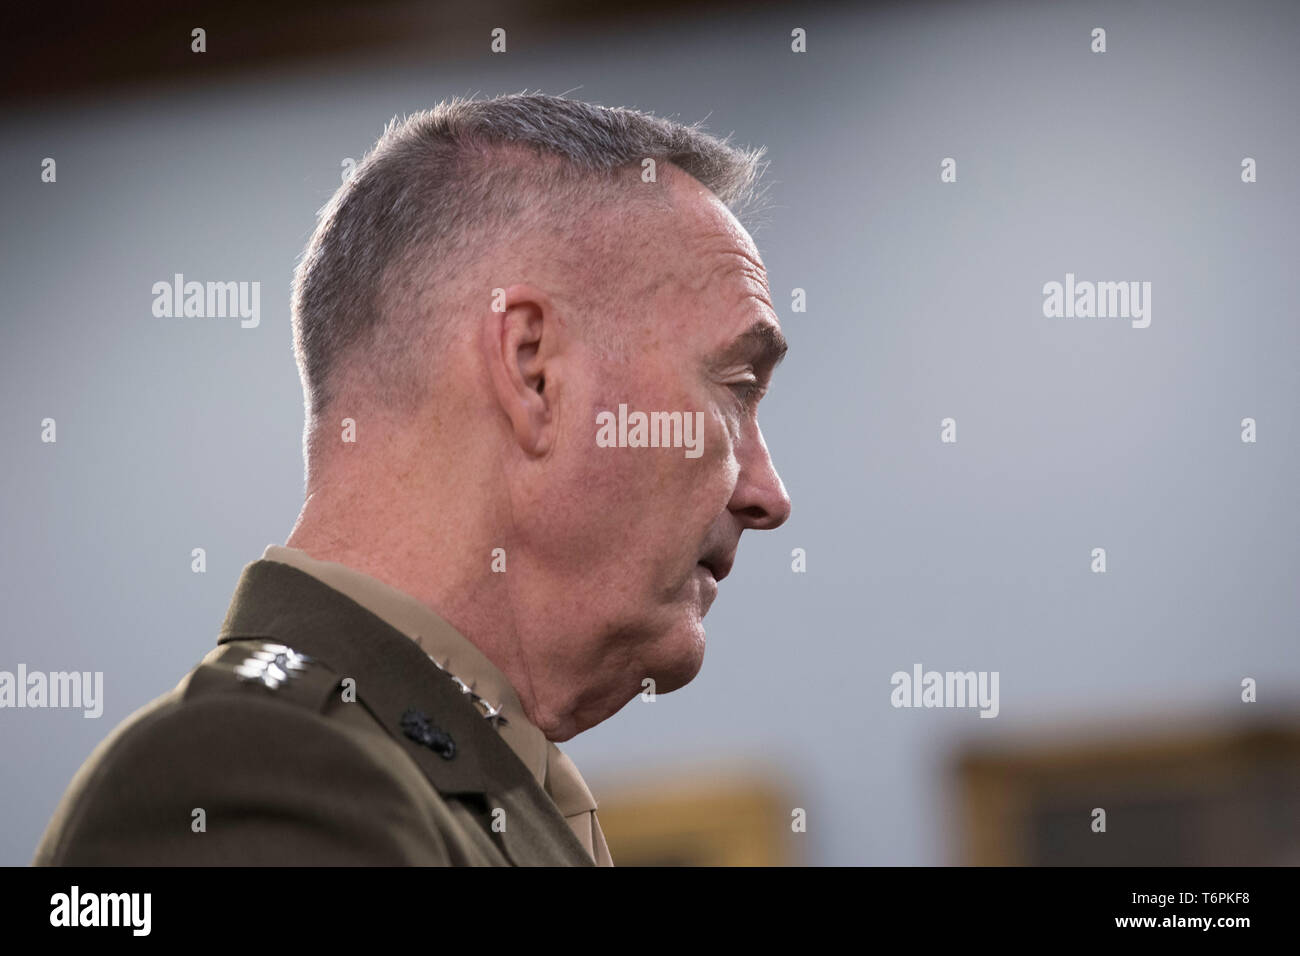 The chairman of the Joint Chiefs of Staff, Marine Corps Gen. Joseph F. Dunford Jr, is seen before the start a budget hearing with the House Appropriations Defense Subcommittee, Washington, D.C., May 1, 2019. (DoD photo by Lisa Ferdinando) Stock Photo